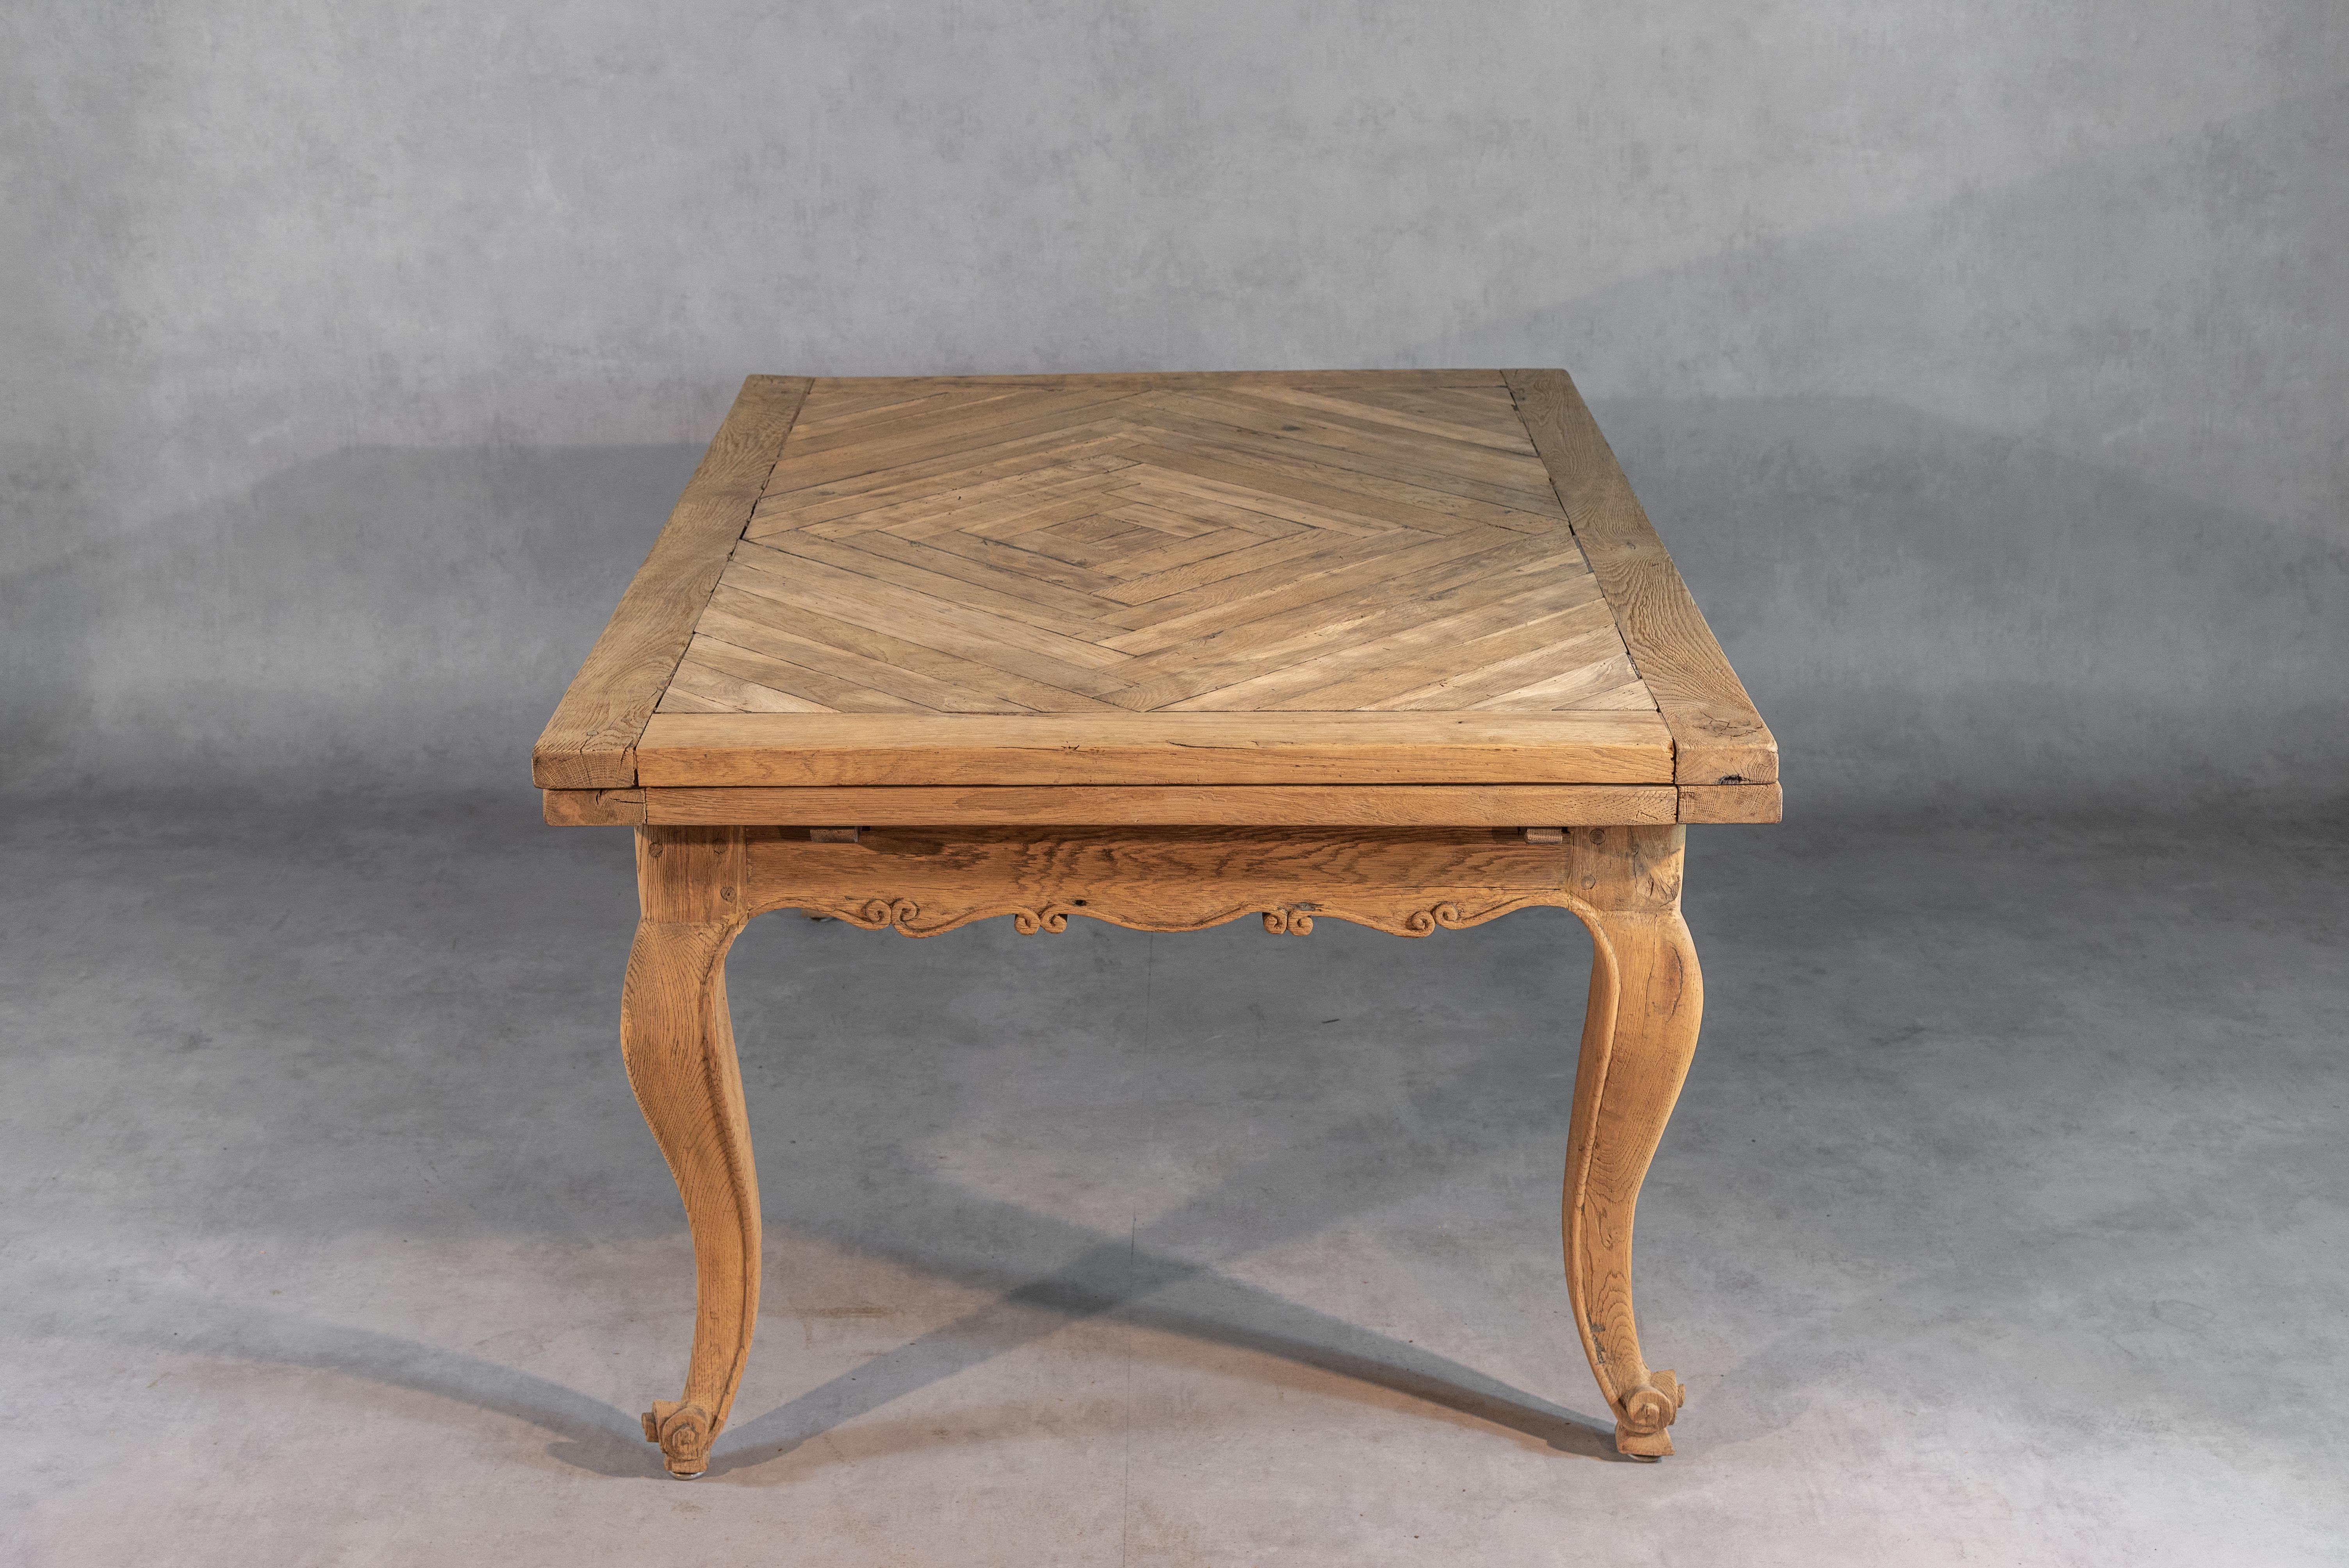 This exquisite French Provincial Louis XV Italian-style table is truly a work of art. Expertly crafted from solid oak, it boasts a stunning “parquet de Versailles” tabletop that is both striking and sophisticated. The two fabulous St Jacques shell